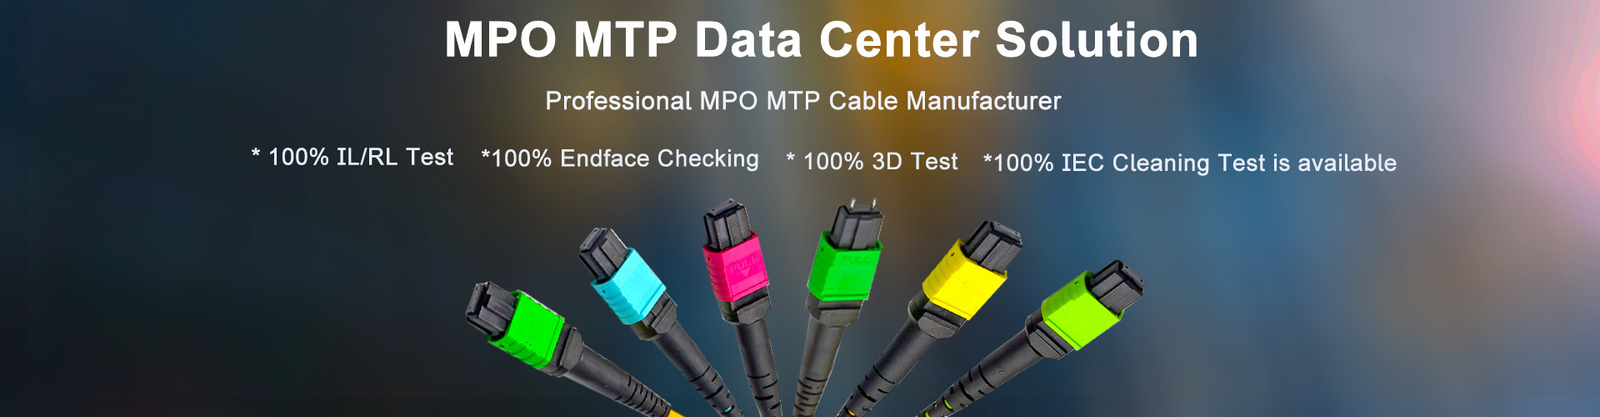 MPO MTP Cable